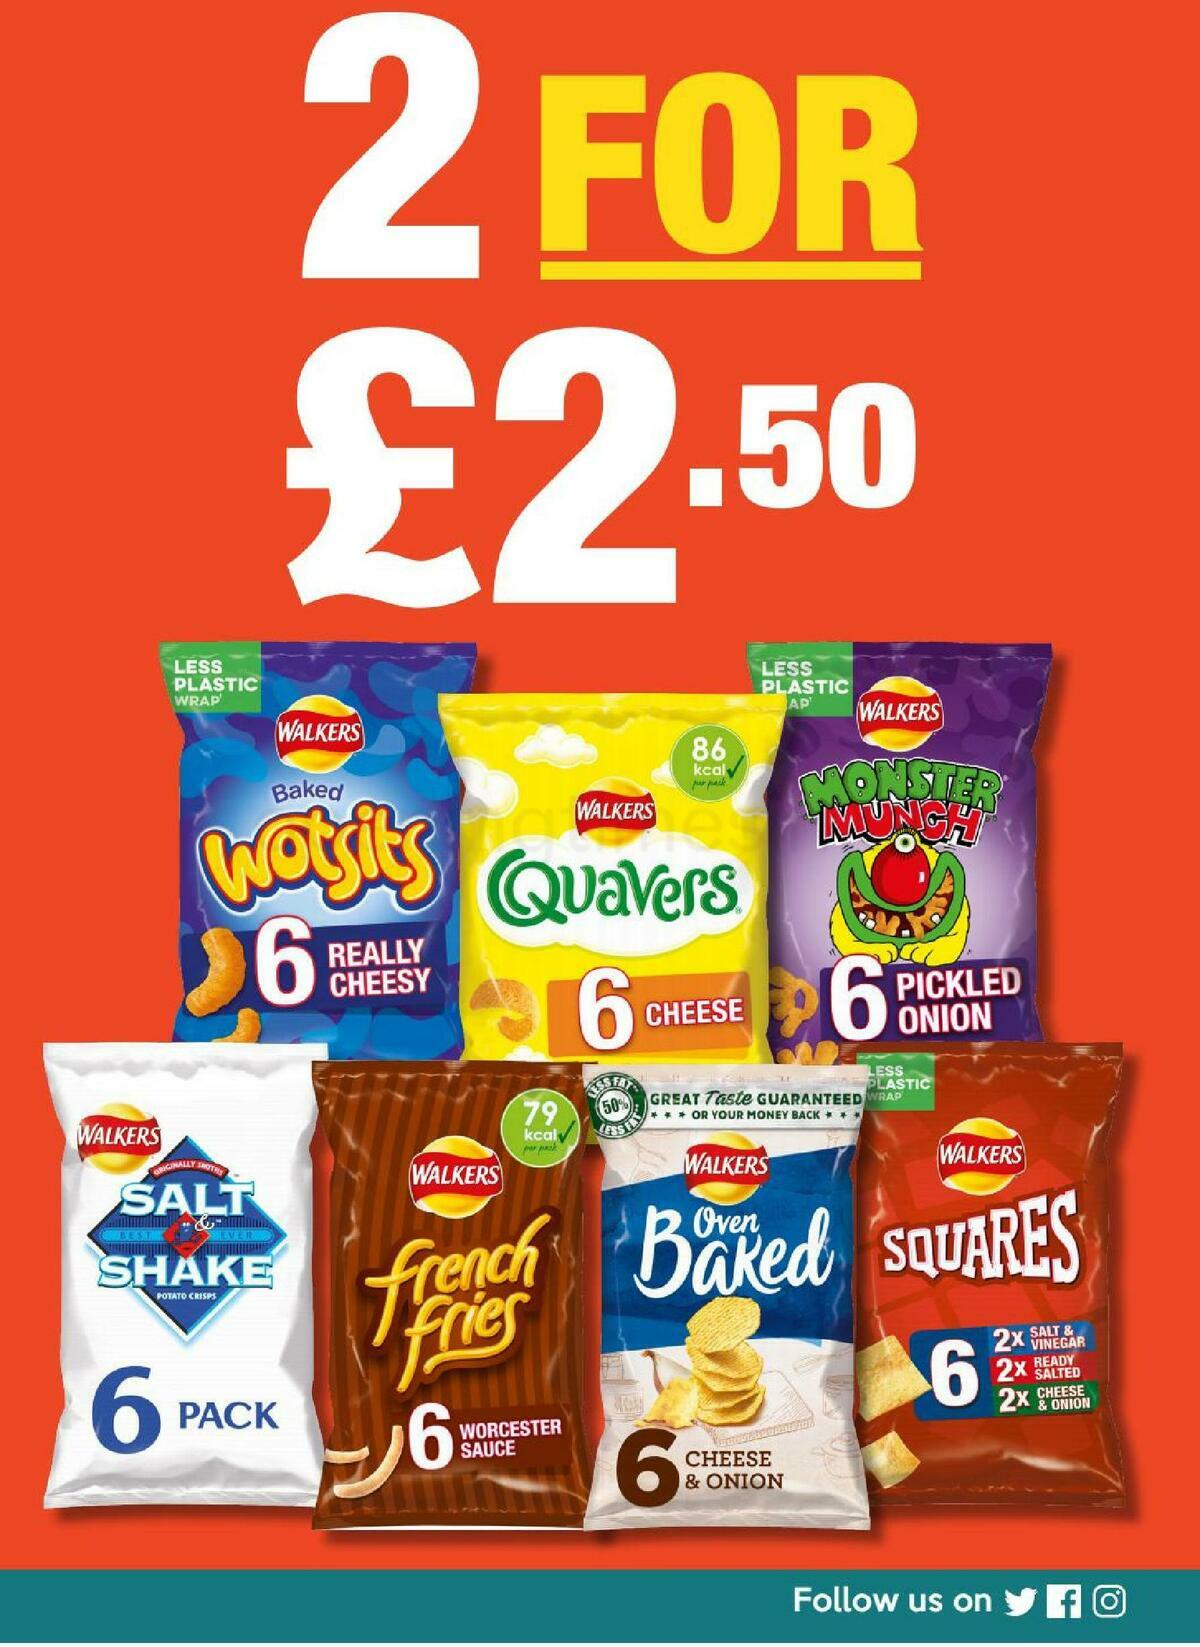 Poundland Offers from 15 June